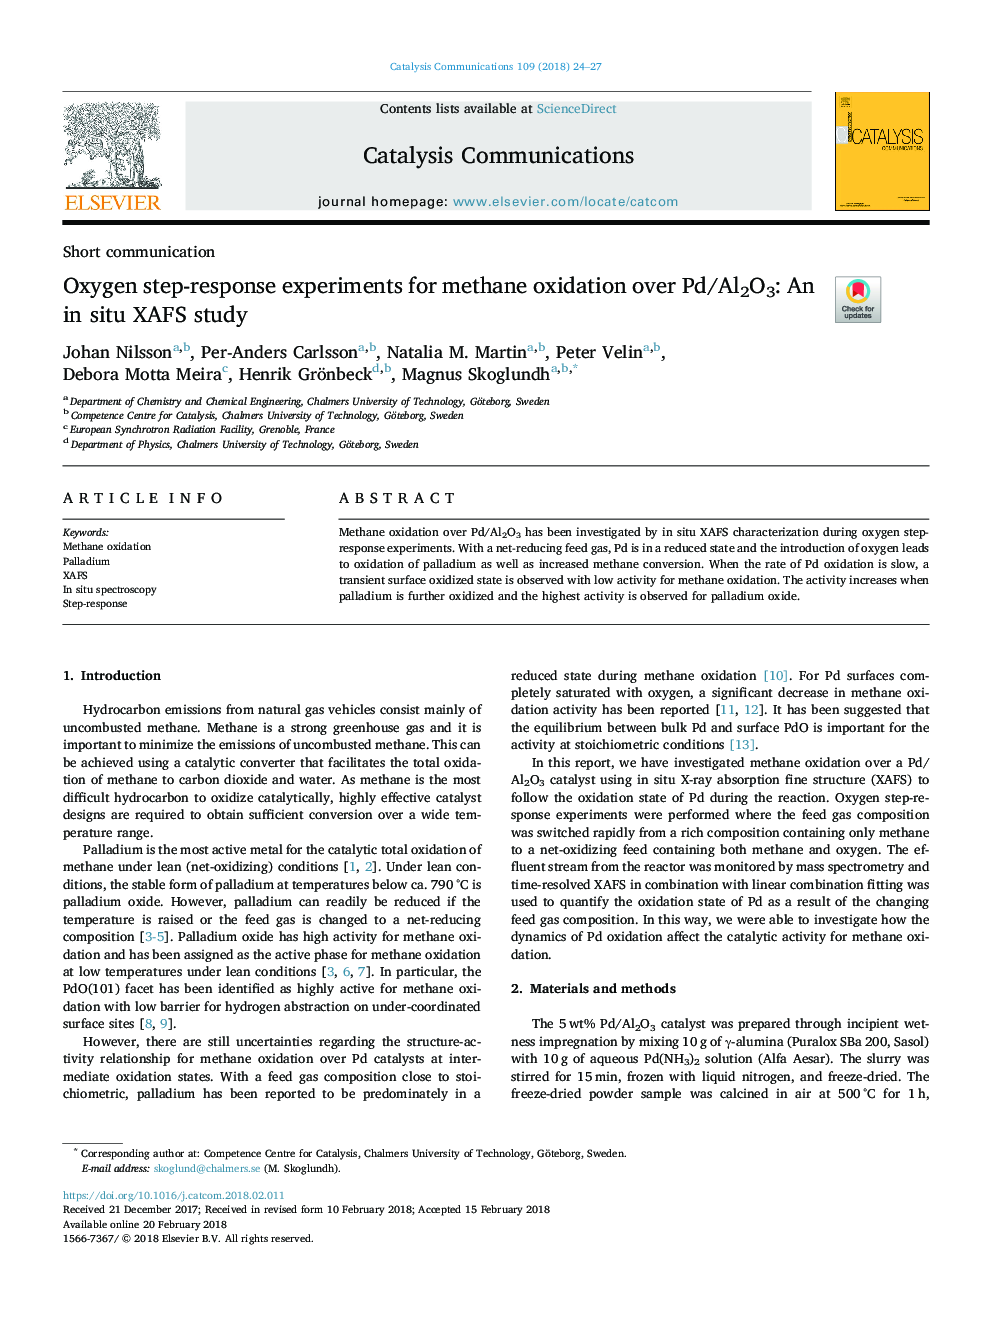 Oxygen step-response experiments for methane oxidation over Pd/Al2O3: An in situ XAFS study